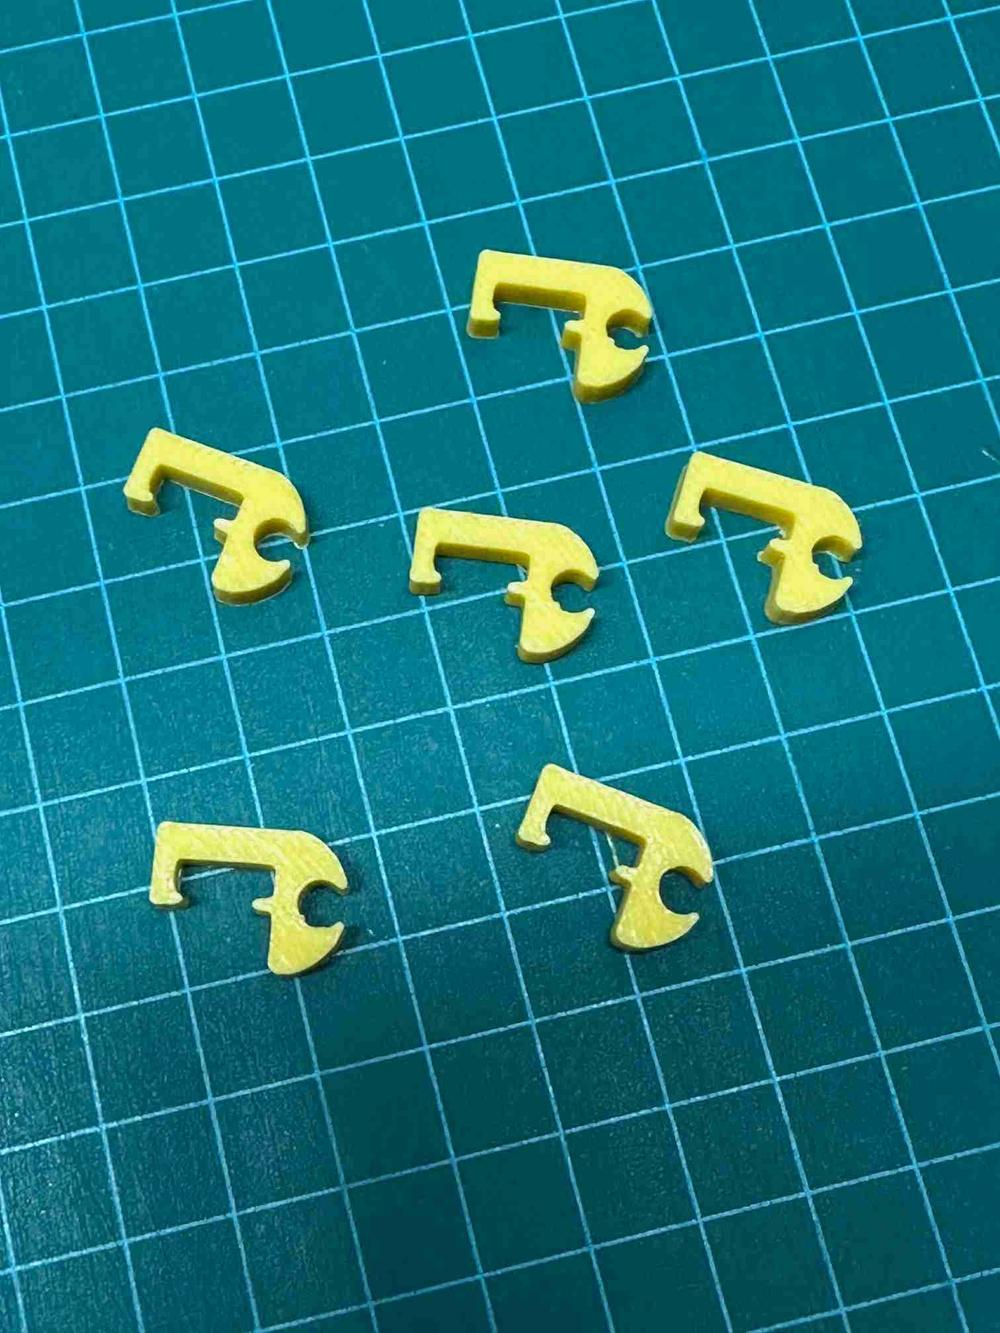 Several 3D printed yellow pound symbols scattered on a green cutting mat.